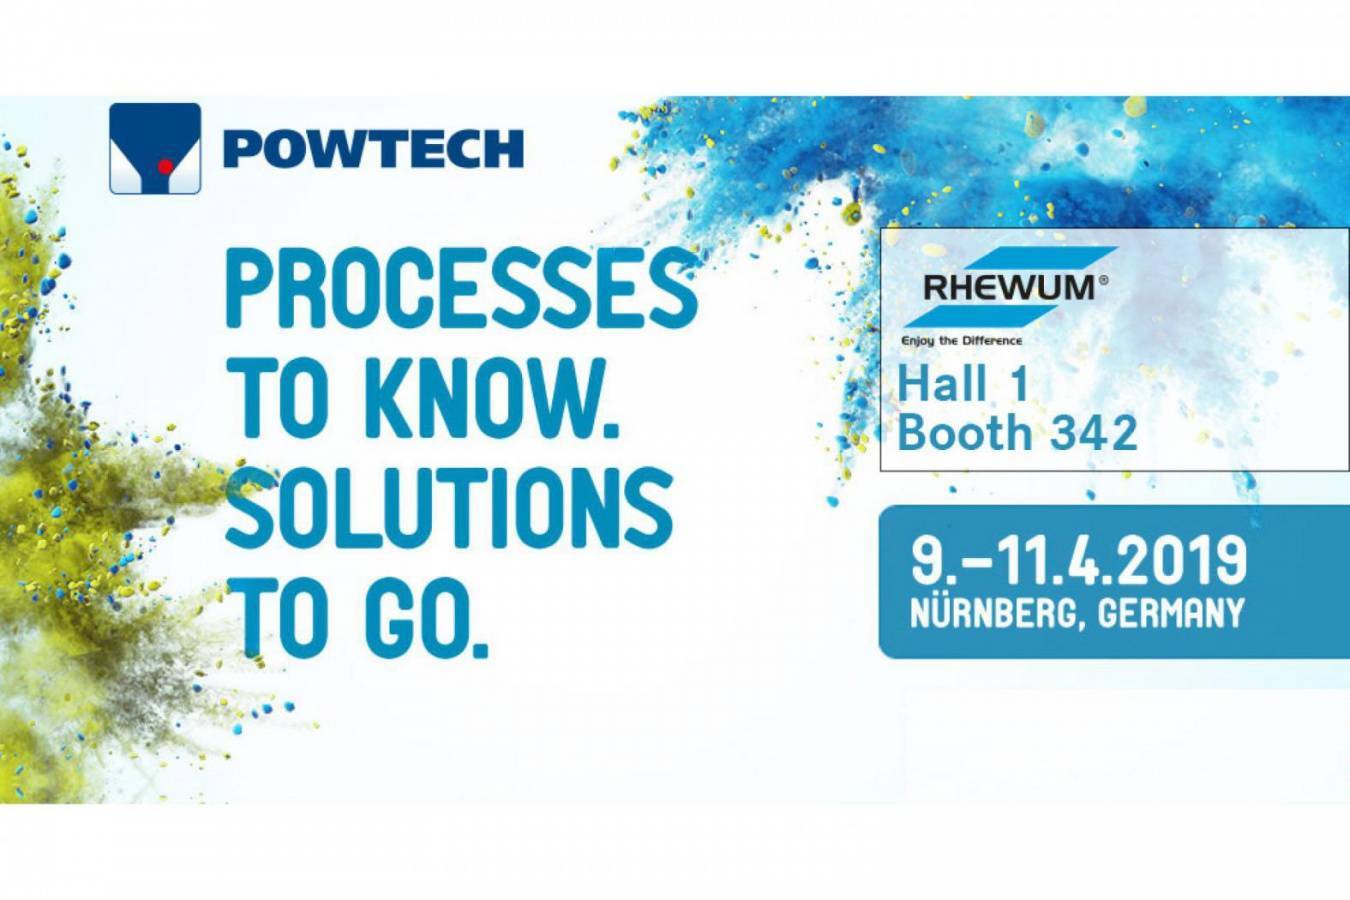 RHEWUM with new appearance at POWTECH 2019 Visit us as usual in hall 1, booth 342.